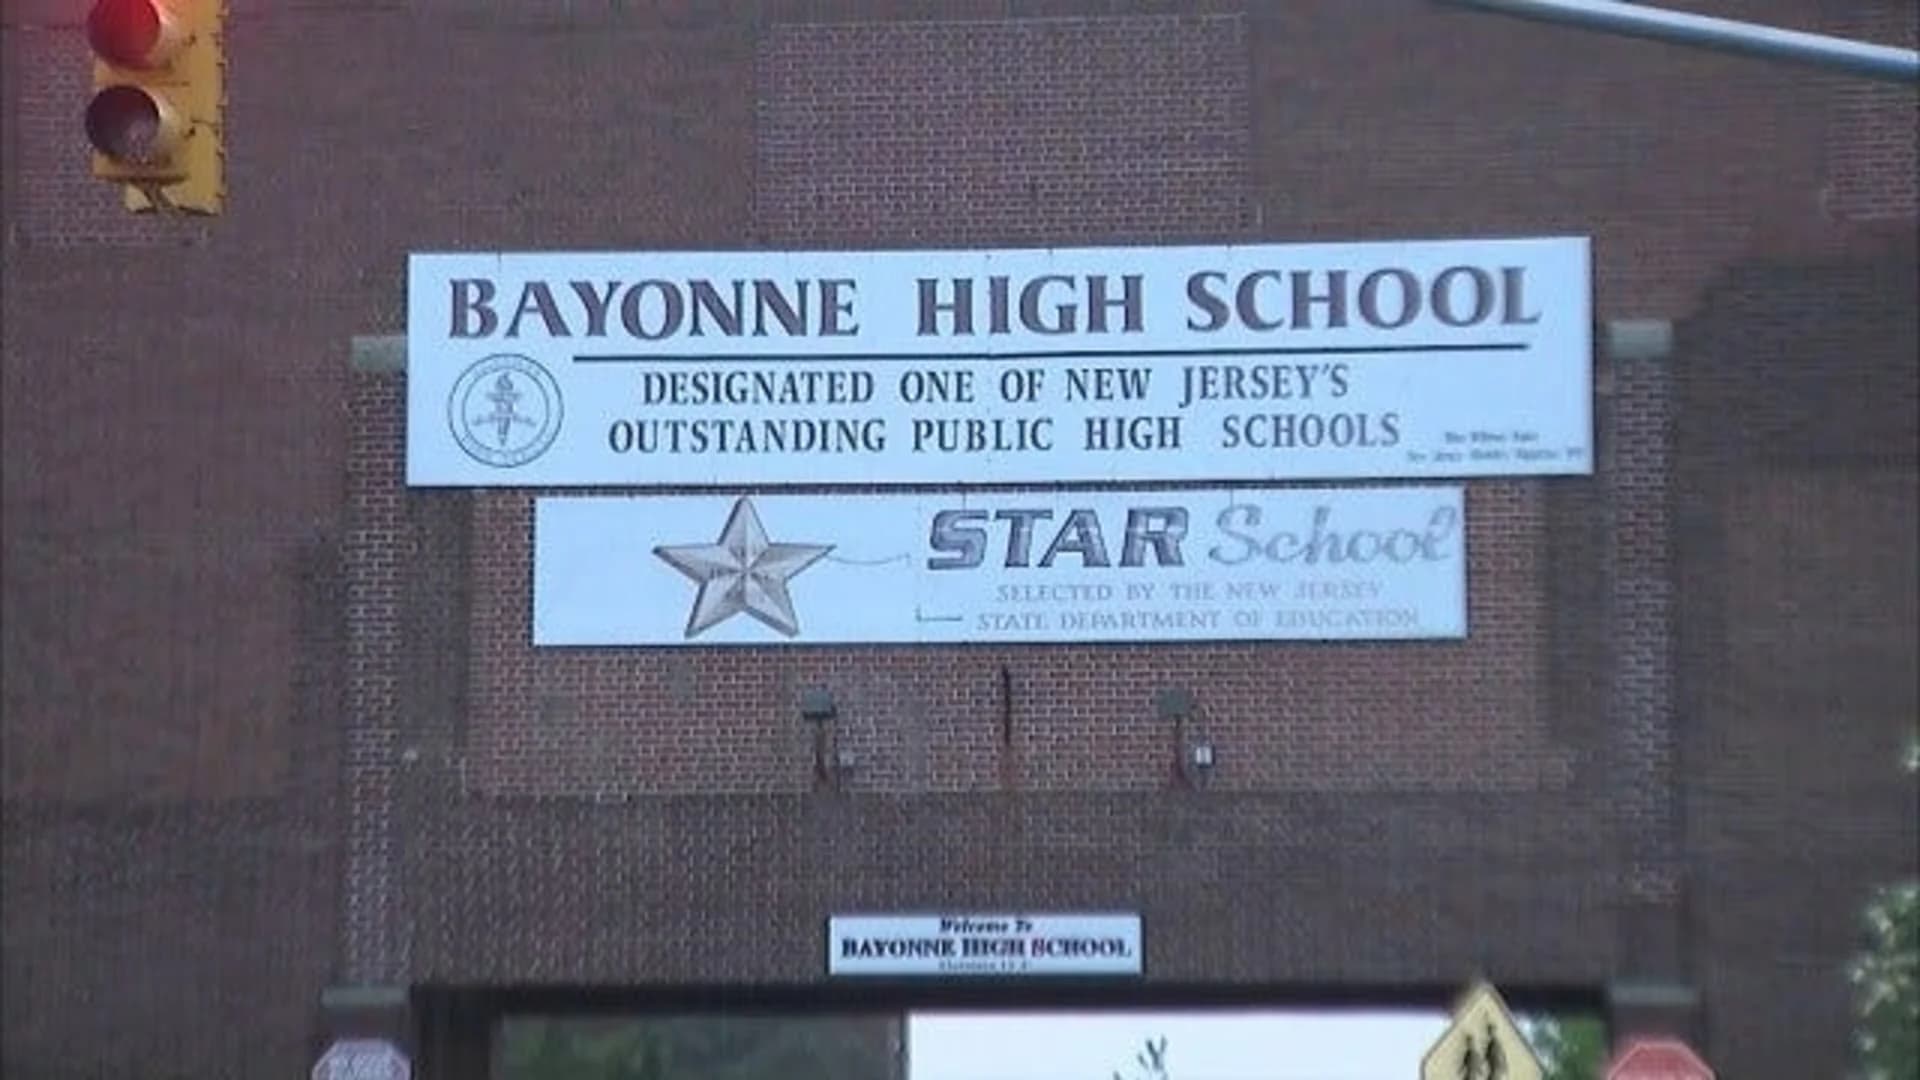 Bayonne High School students stage walkout after nearly 300 employees laid off